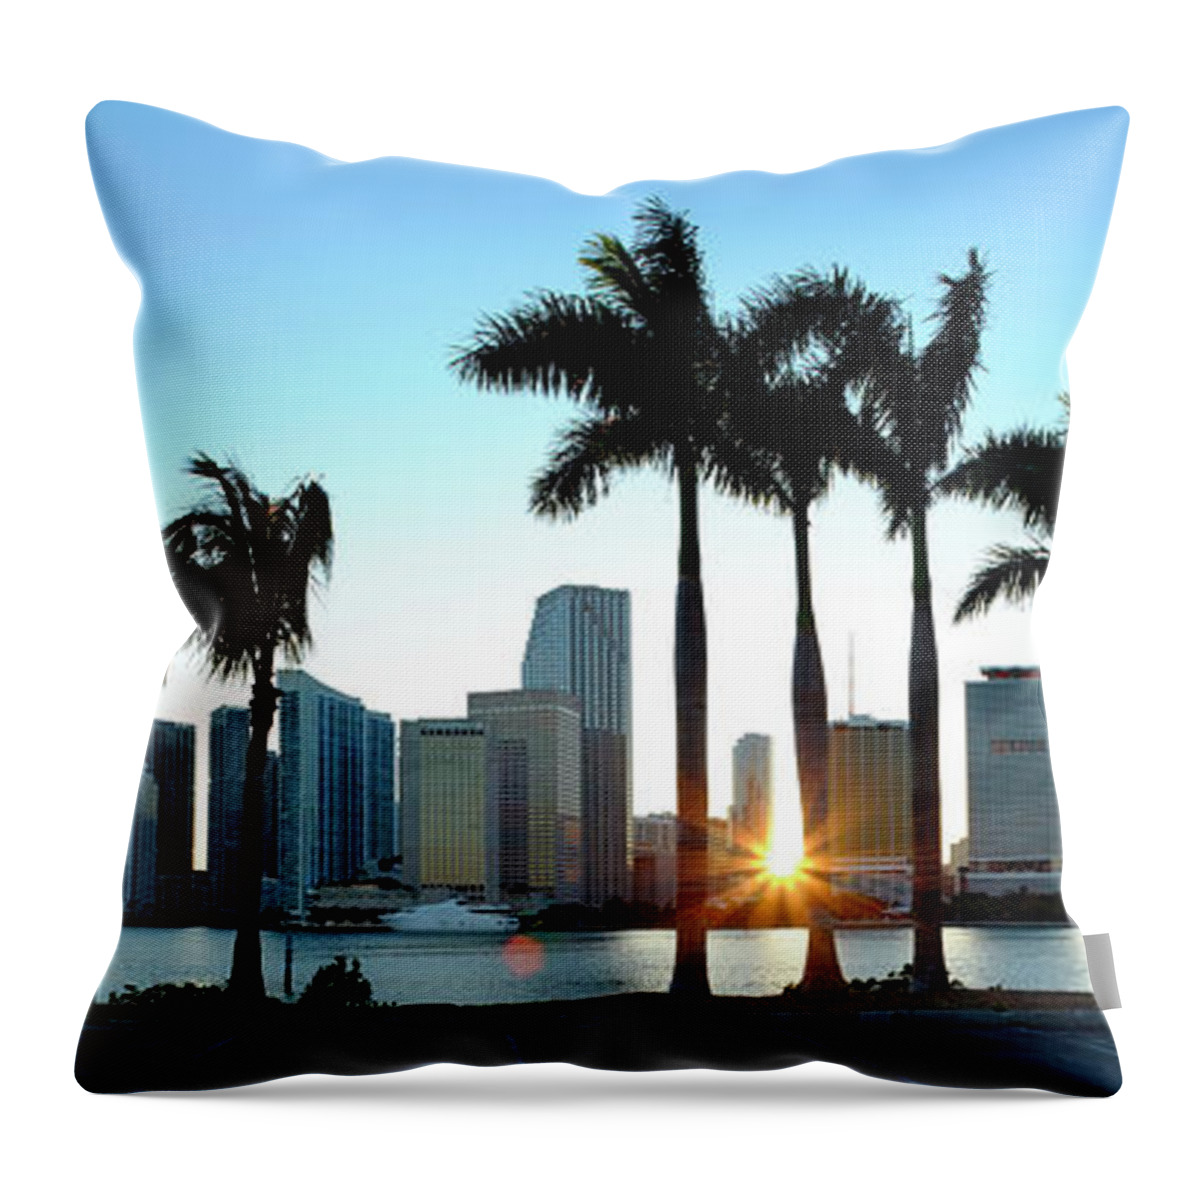 Downtown District Throw Pillow featuring the photograph Miami Skyline Viewed Over Marina by Travelpix Ltd